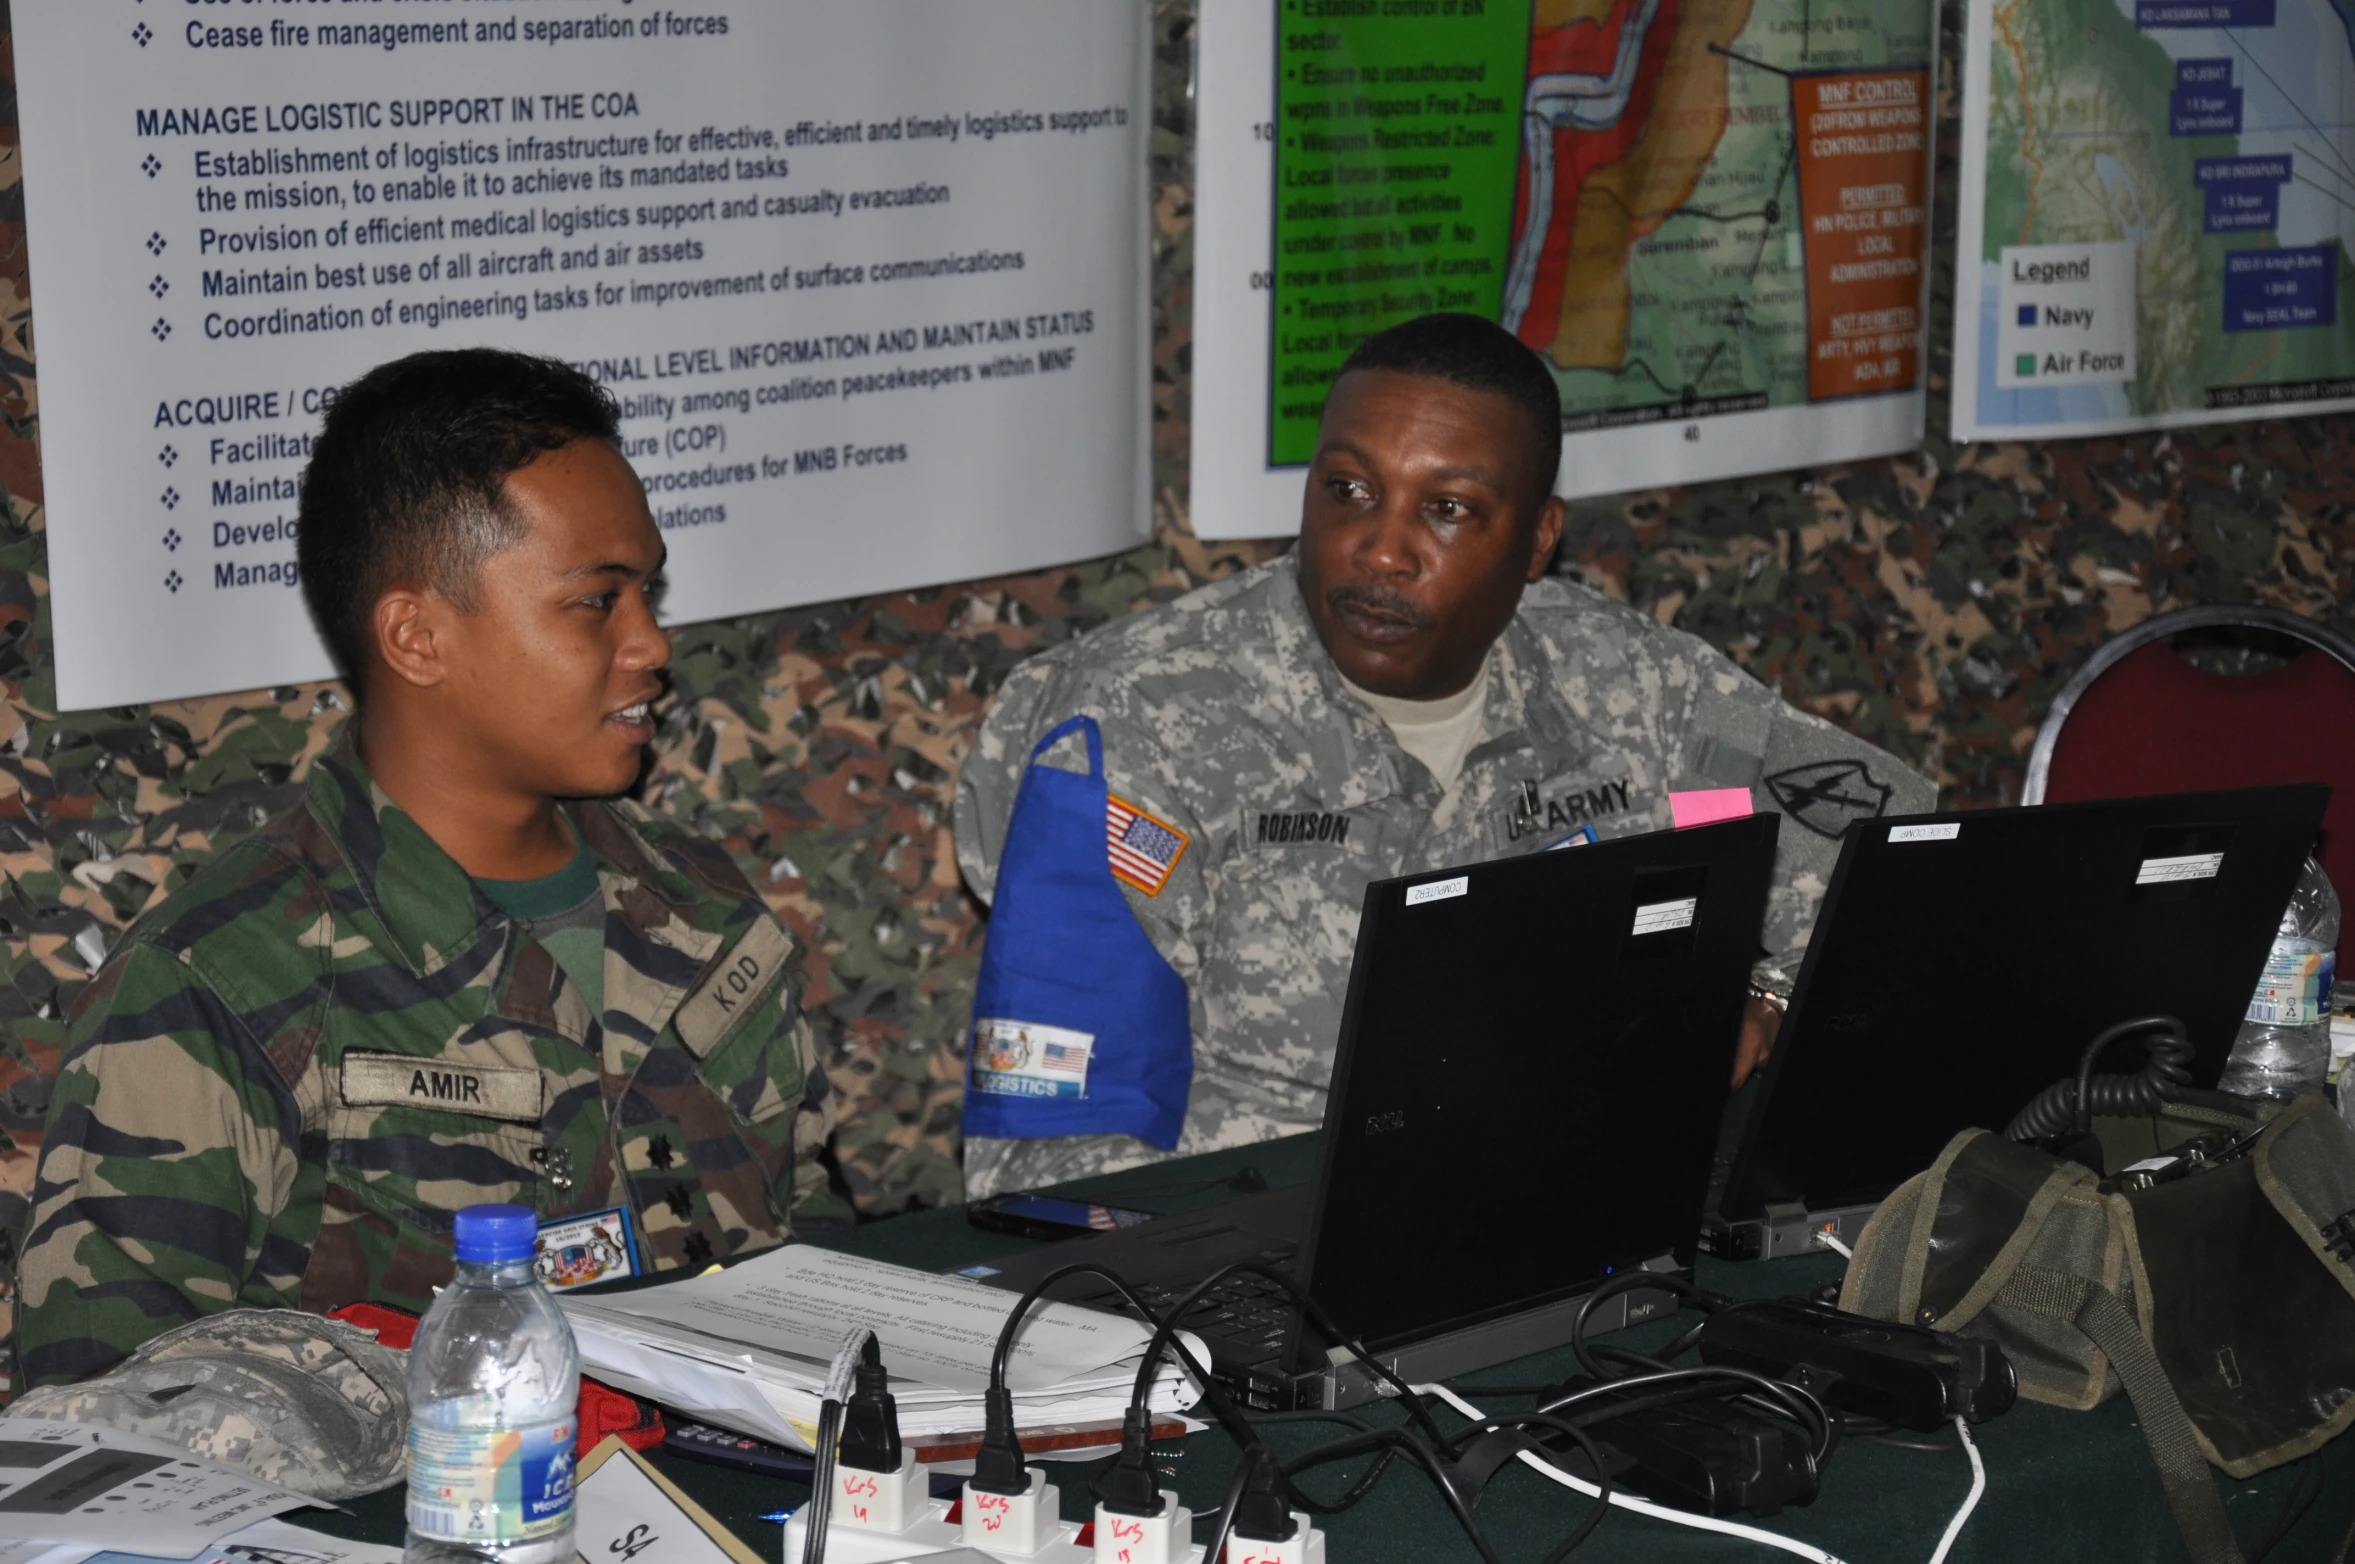 two military men sit and talk in front of laptops